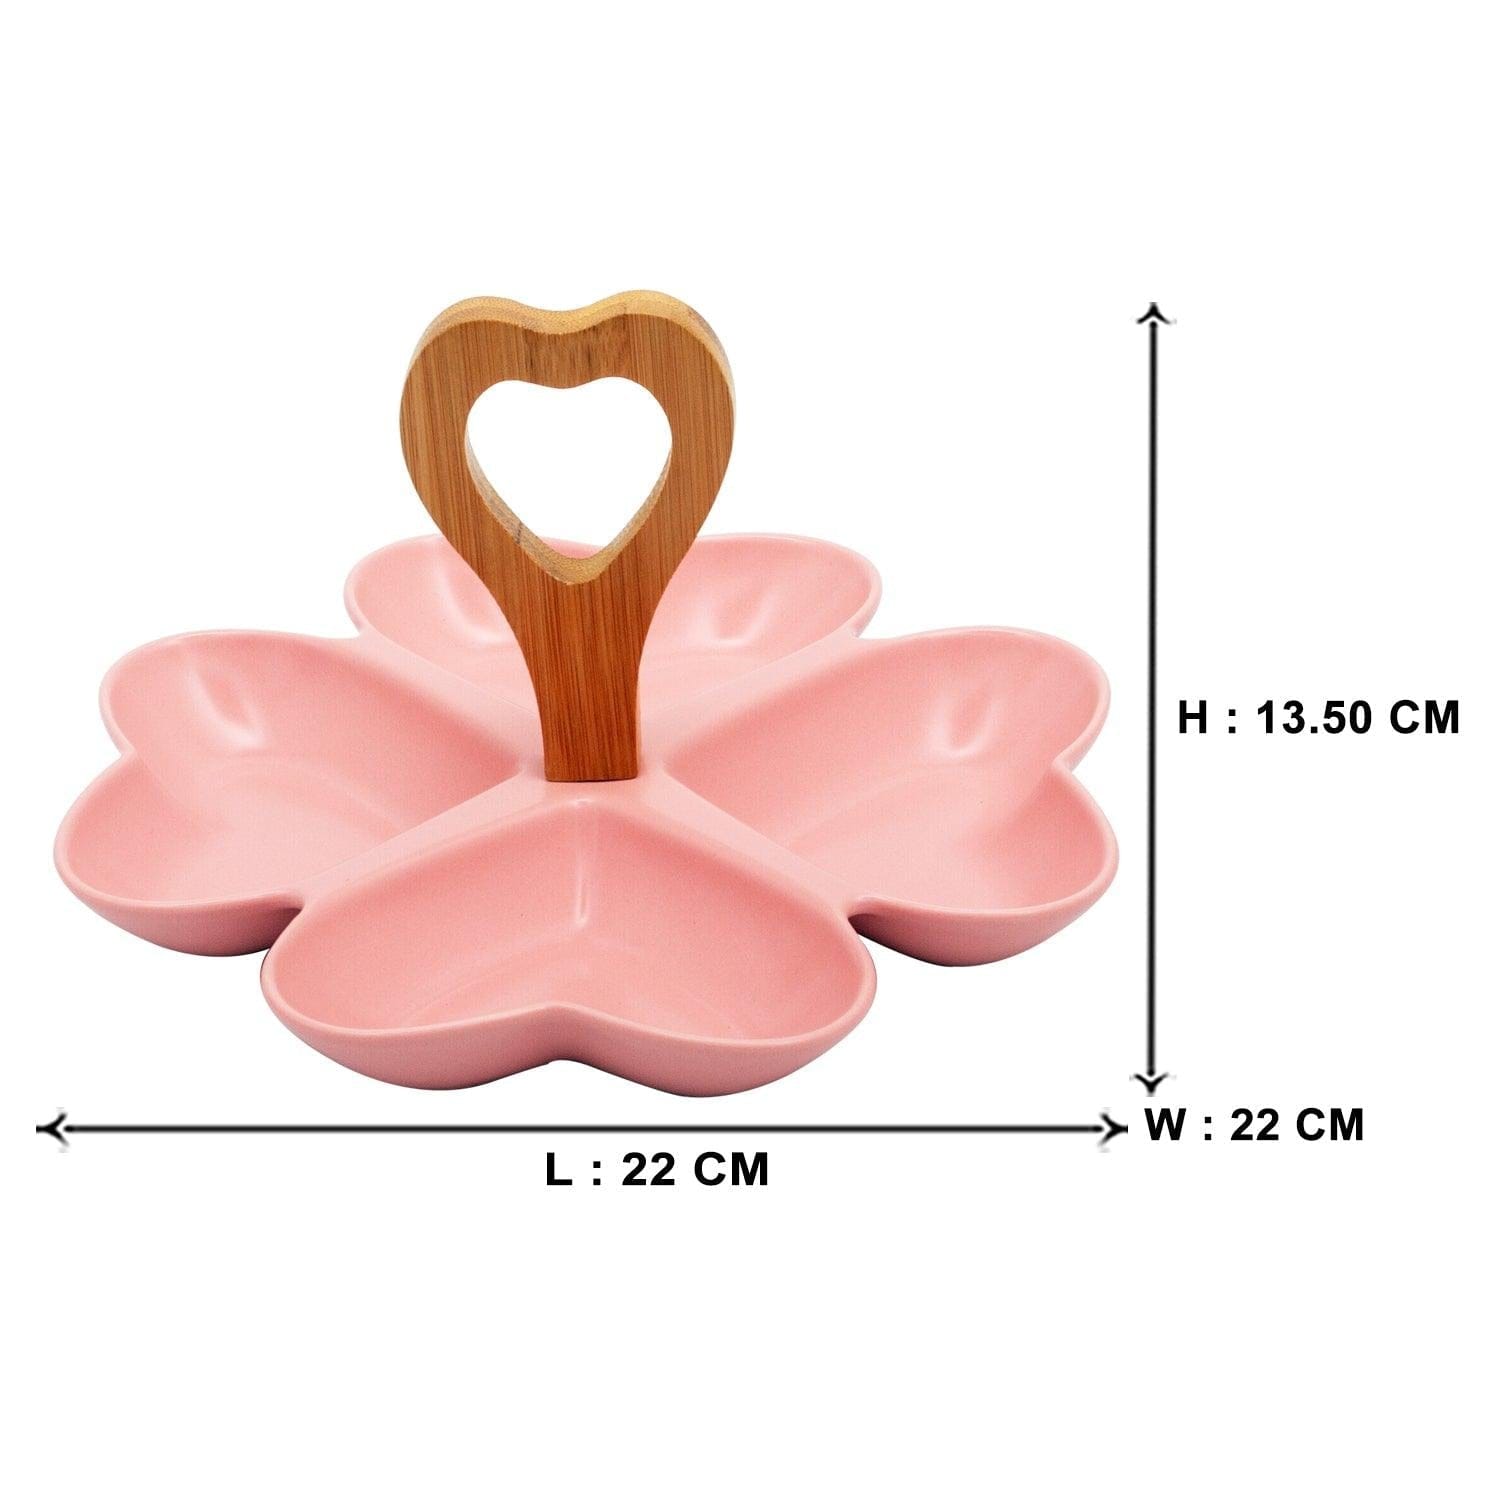 4 Compartment Hearty Pink Ceramic Serving Platter with Wooden Handle